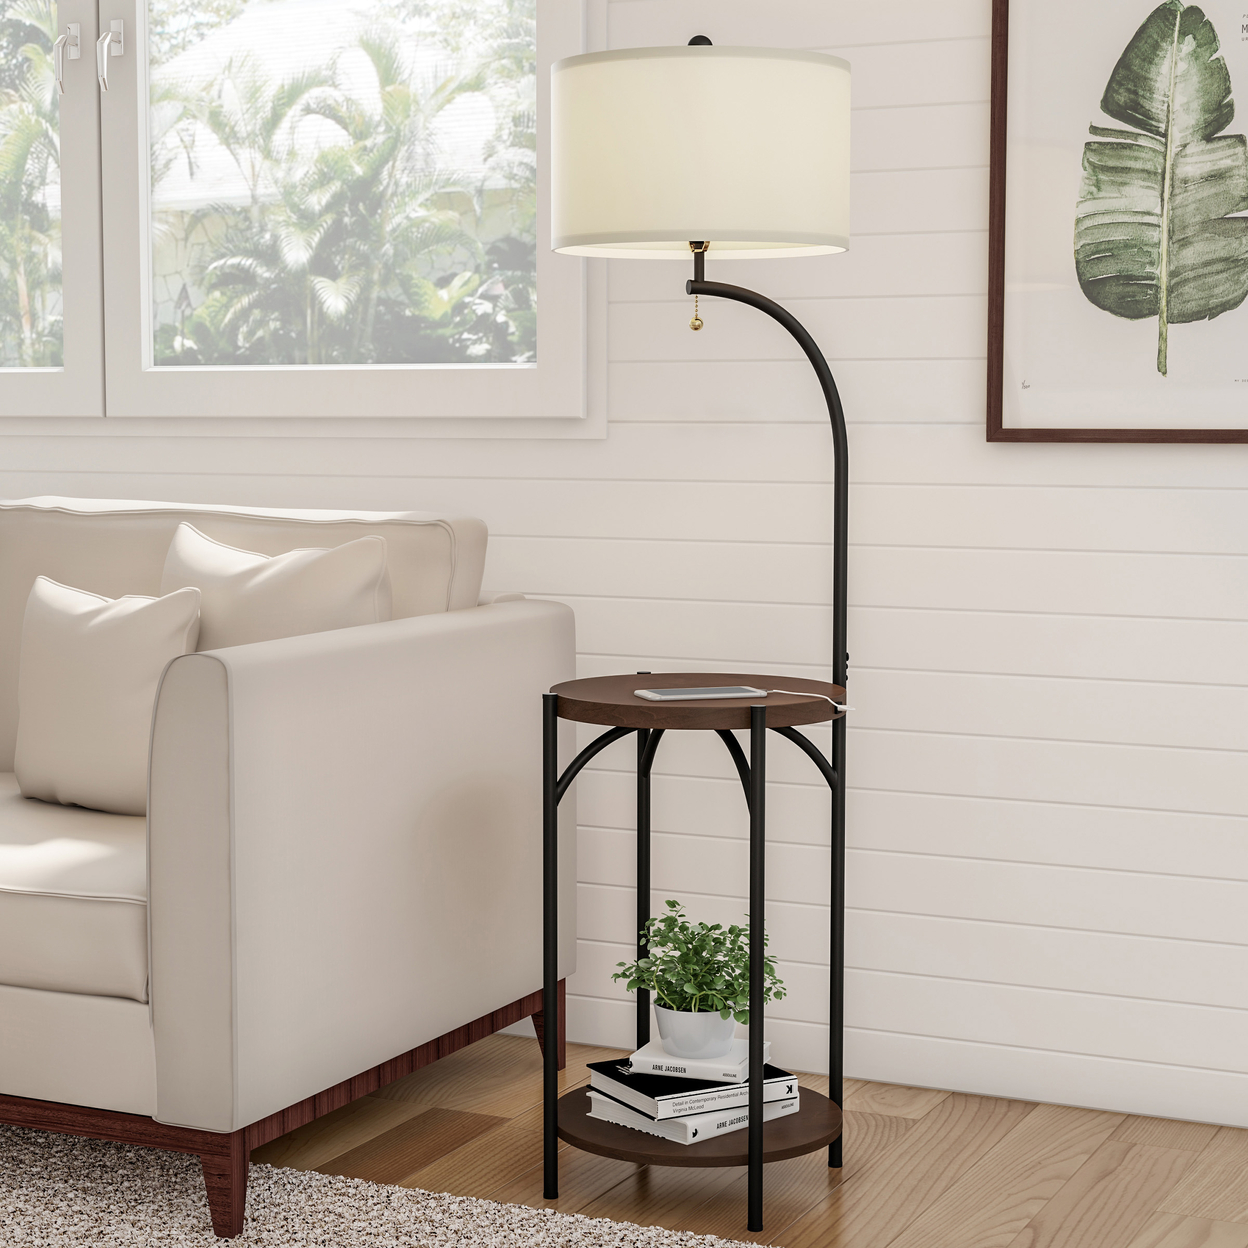 2 Shelf Accent End Table Floor Lamp Metal Legs Light USB Charging Port Bed Side